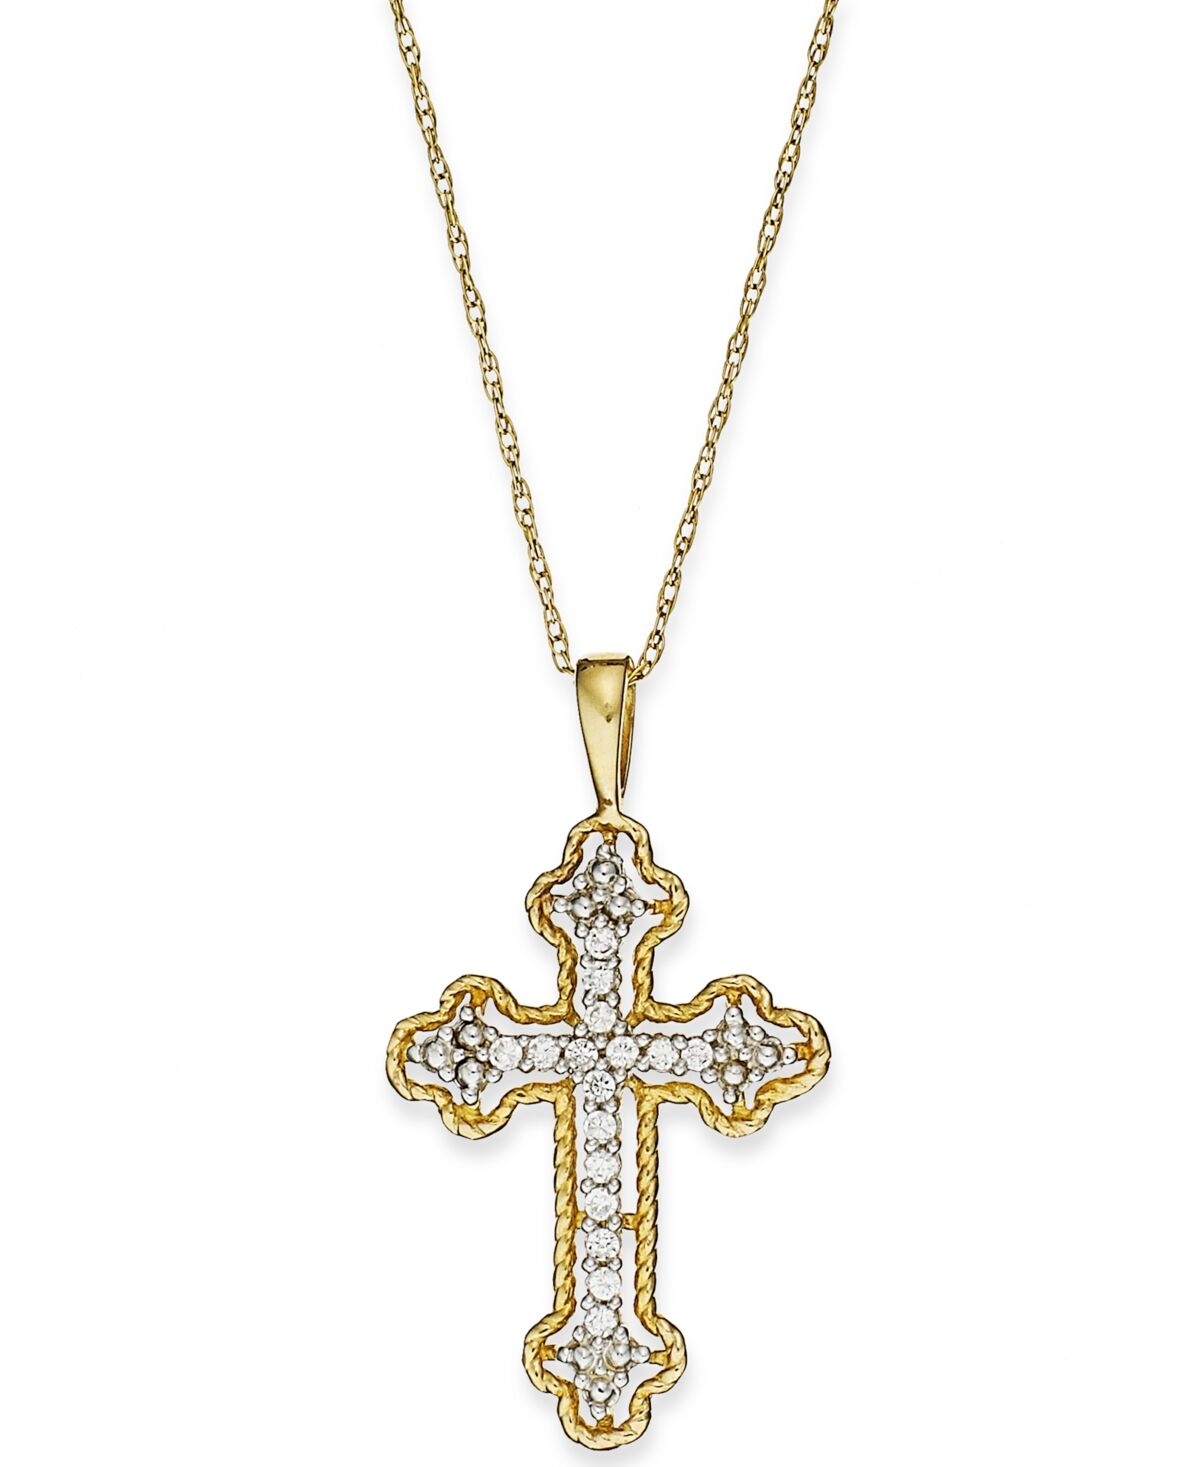 Macy's Diamond Antique Cross Pendant Necklace in 14k White, Yellow, or Rose Gold (1/10 ct. t.w) - Yellow Gold